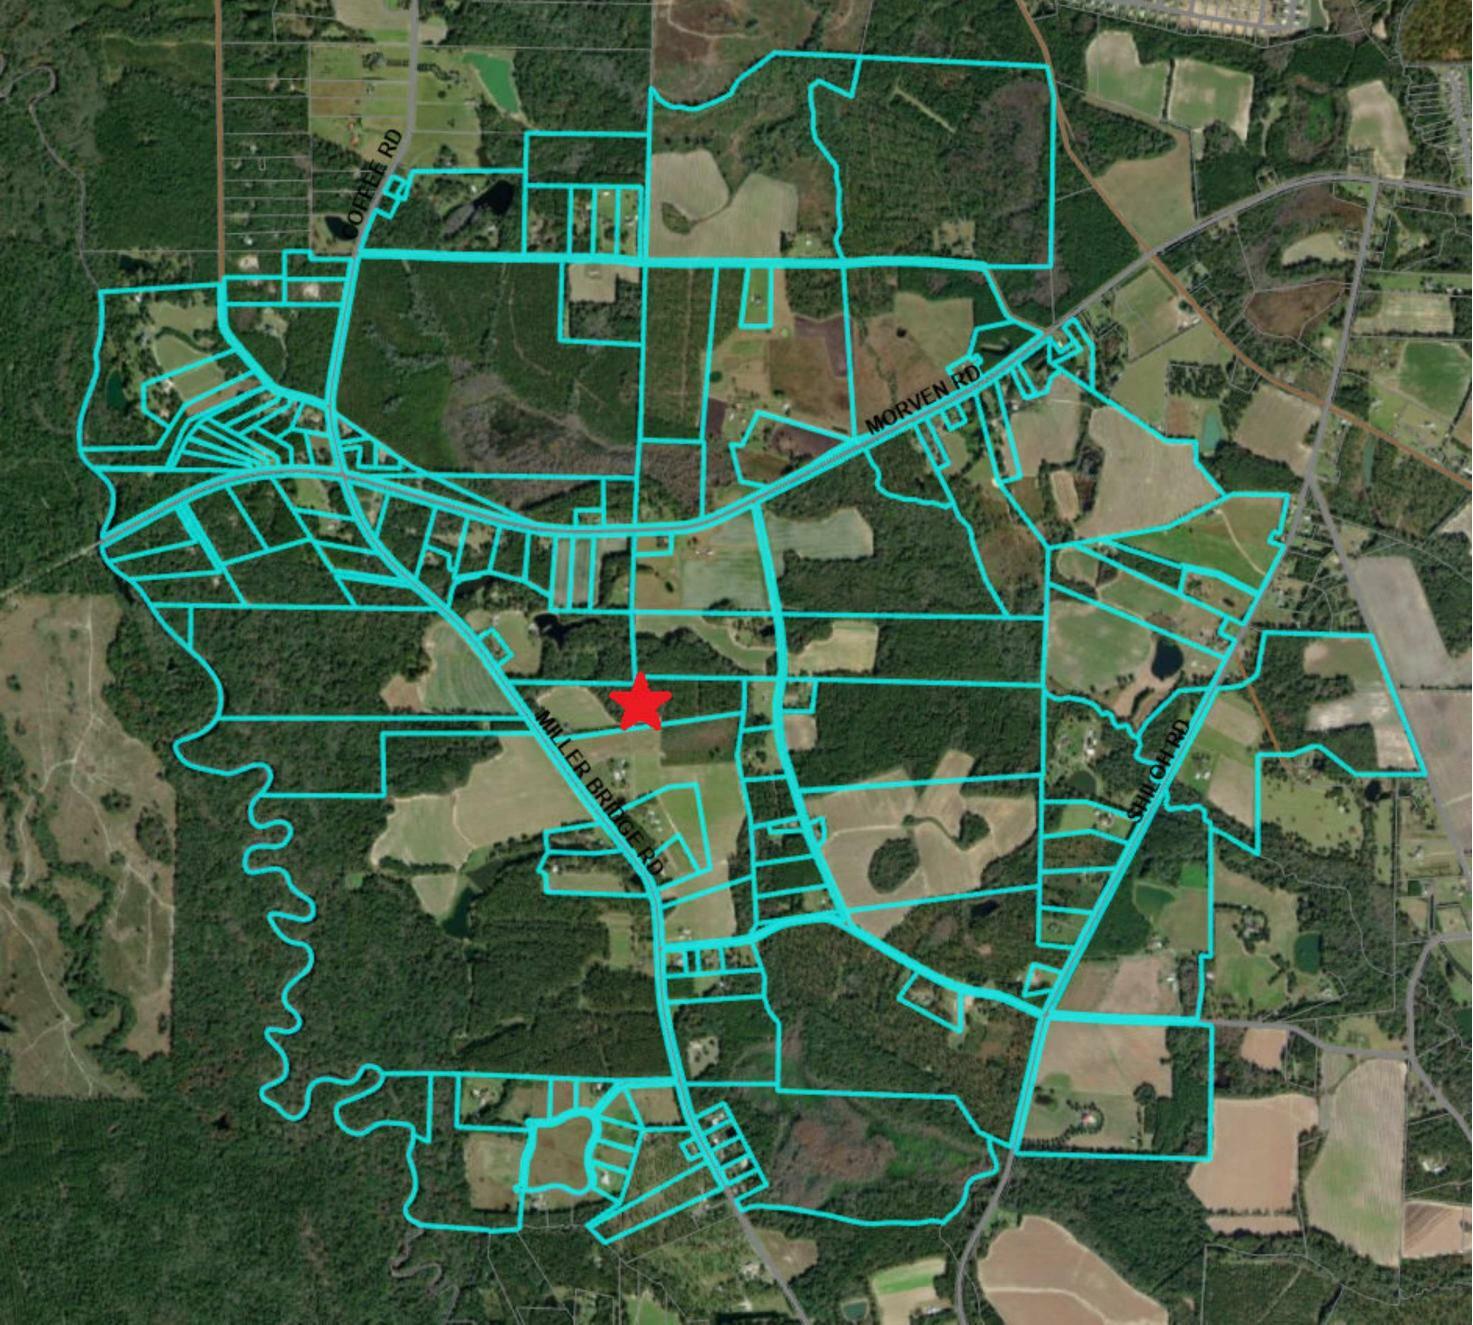 Location Aerial map with parcels